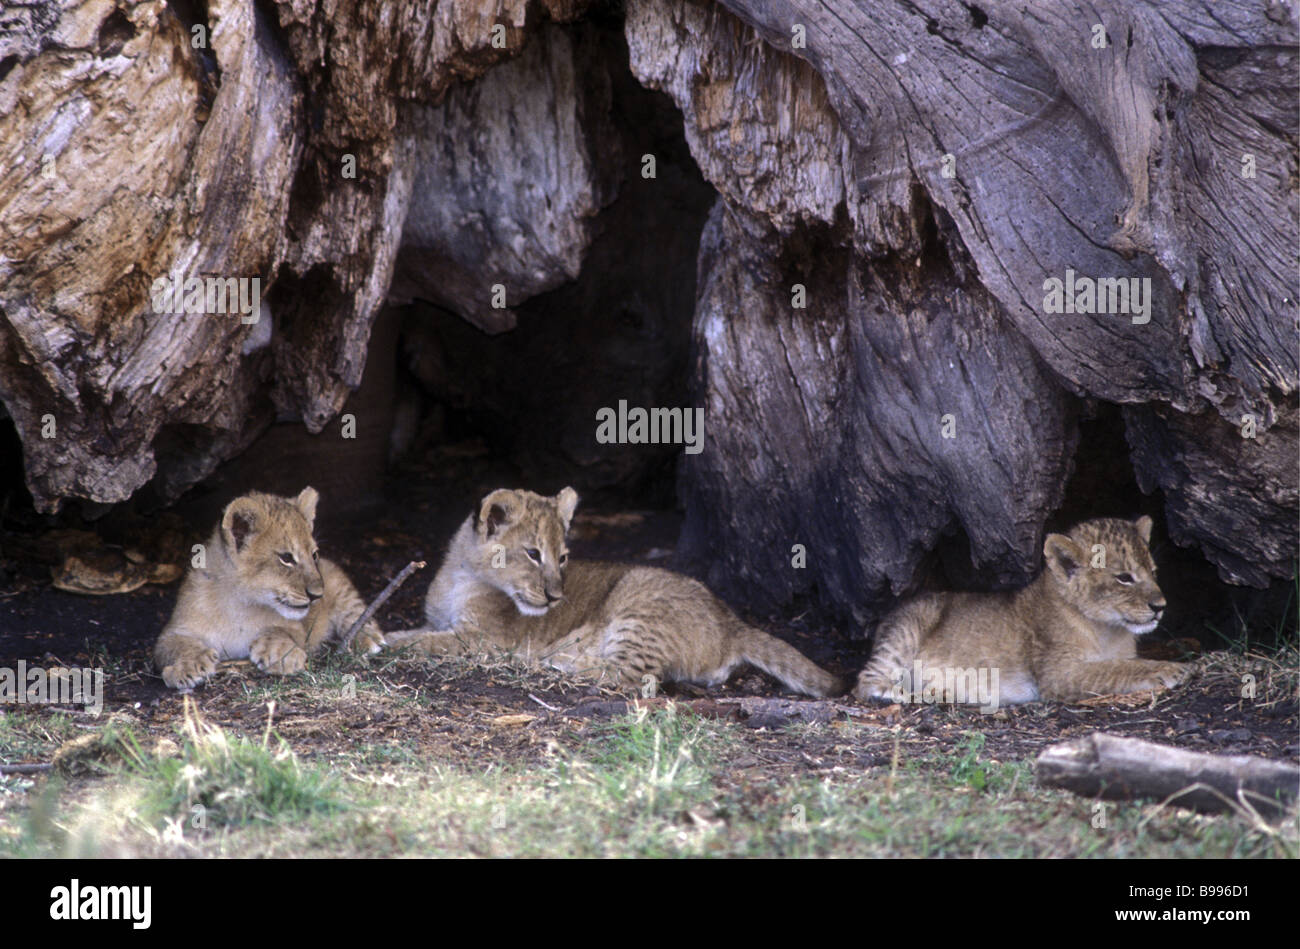 Group of three baby lion cubs at the entrance to their den under the trunk of an ancient fig tree Masai Mara National Reserve Stock Photo